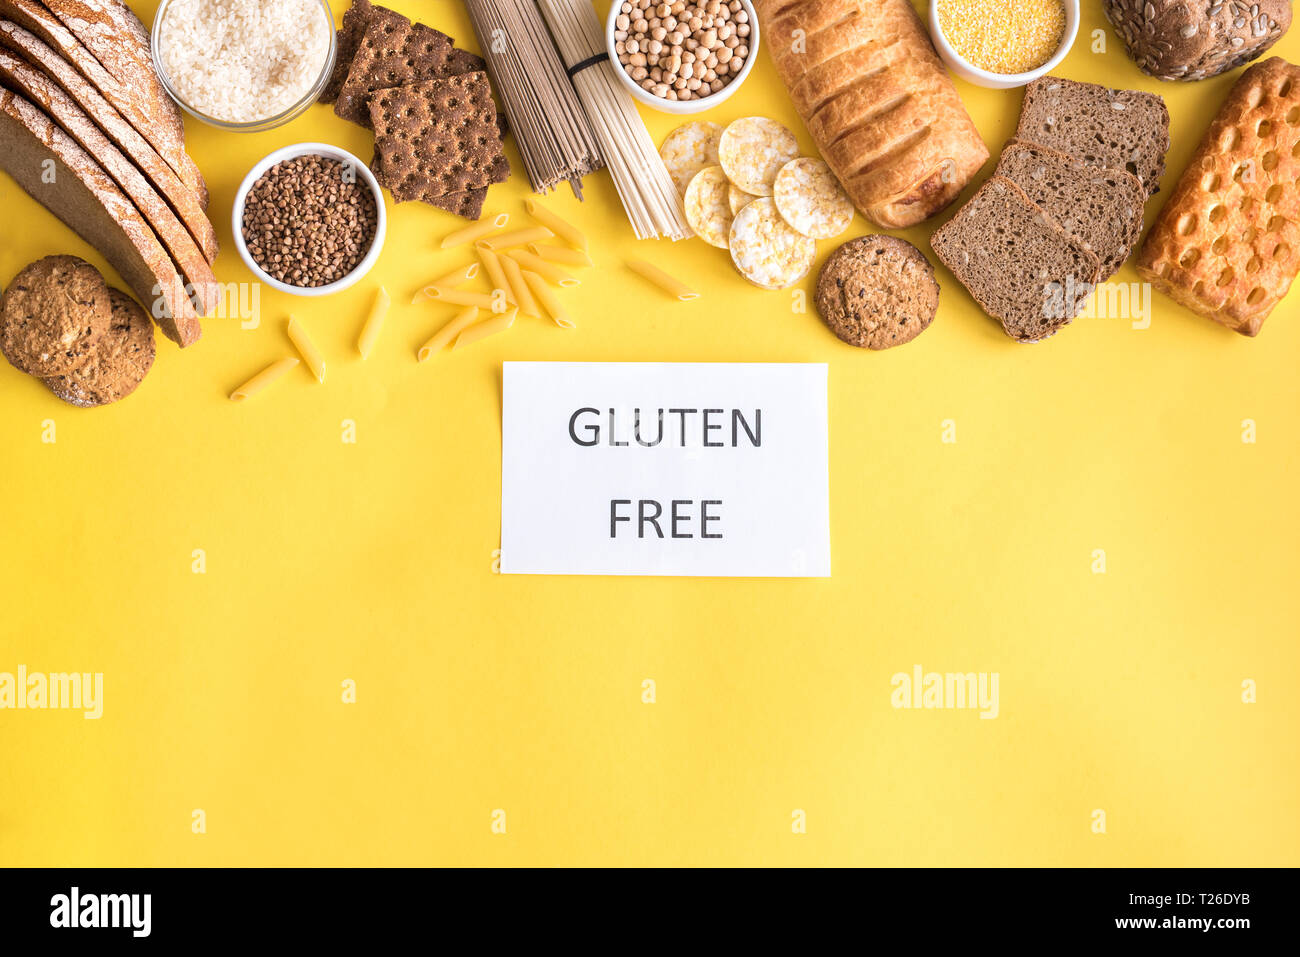 Gluten free food. Various gluten free pasta, bread, snacks and flour on yellow background, top view, copy space. Stock Photo